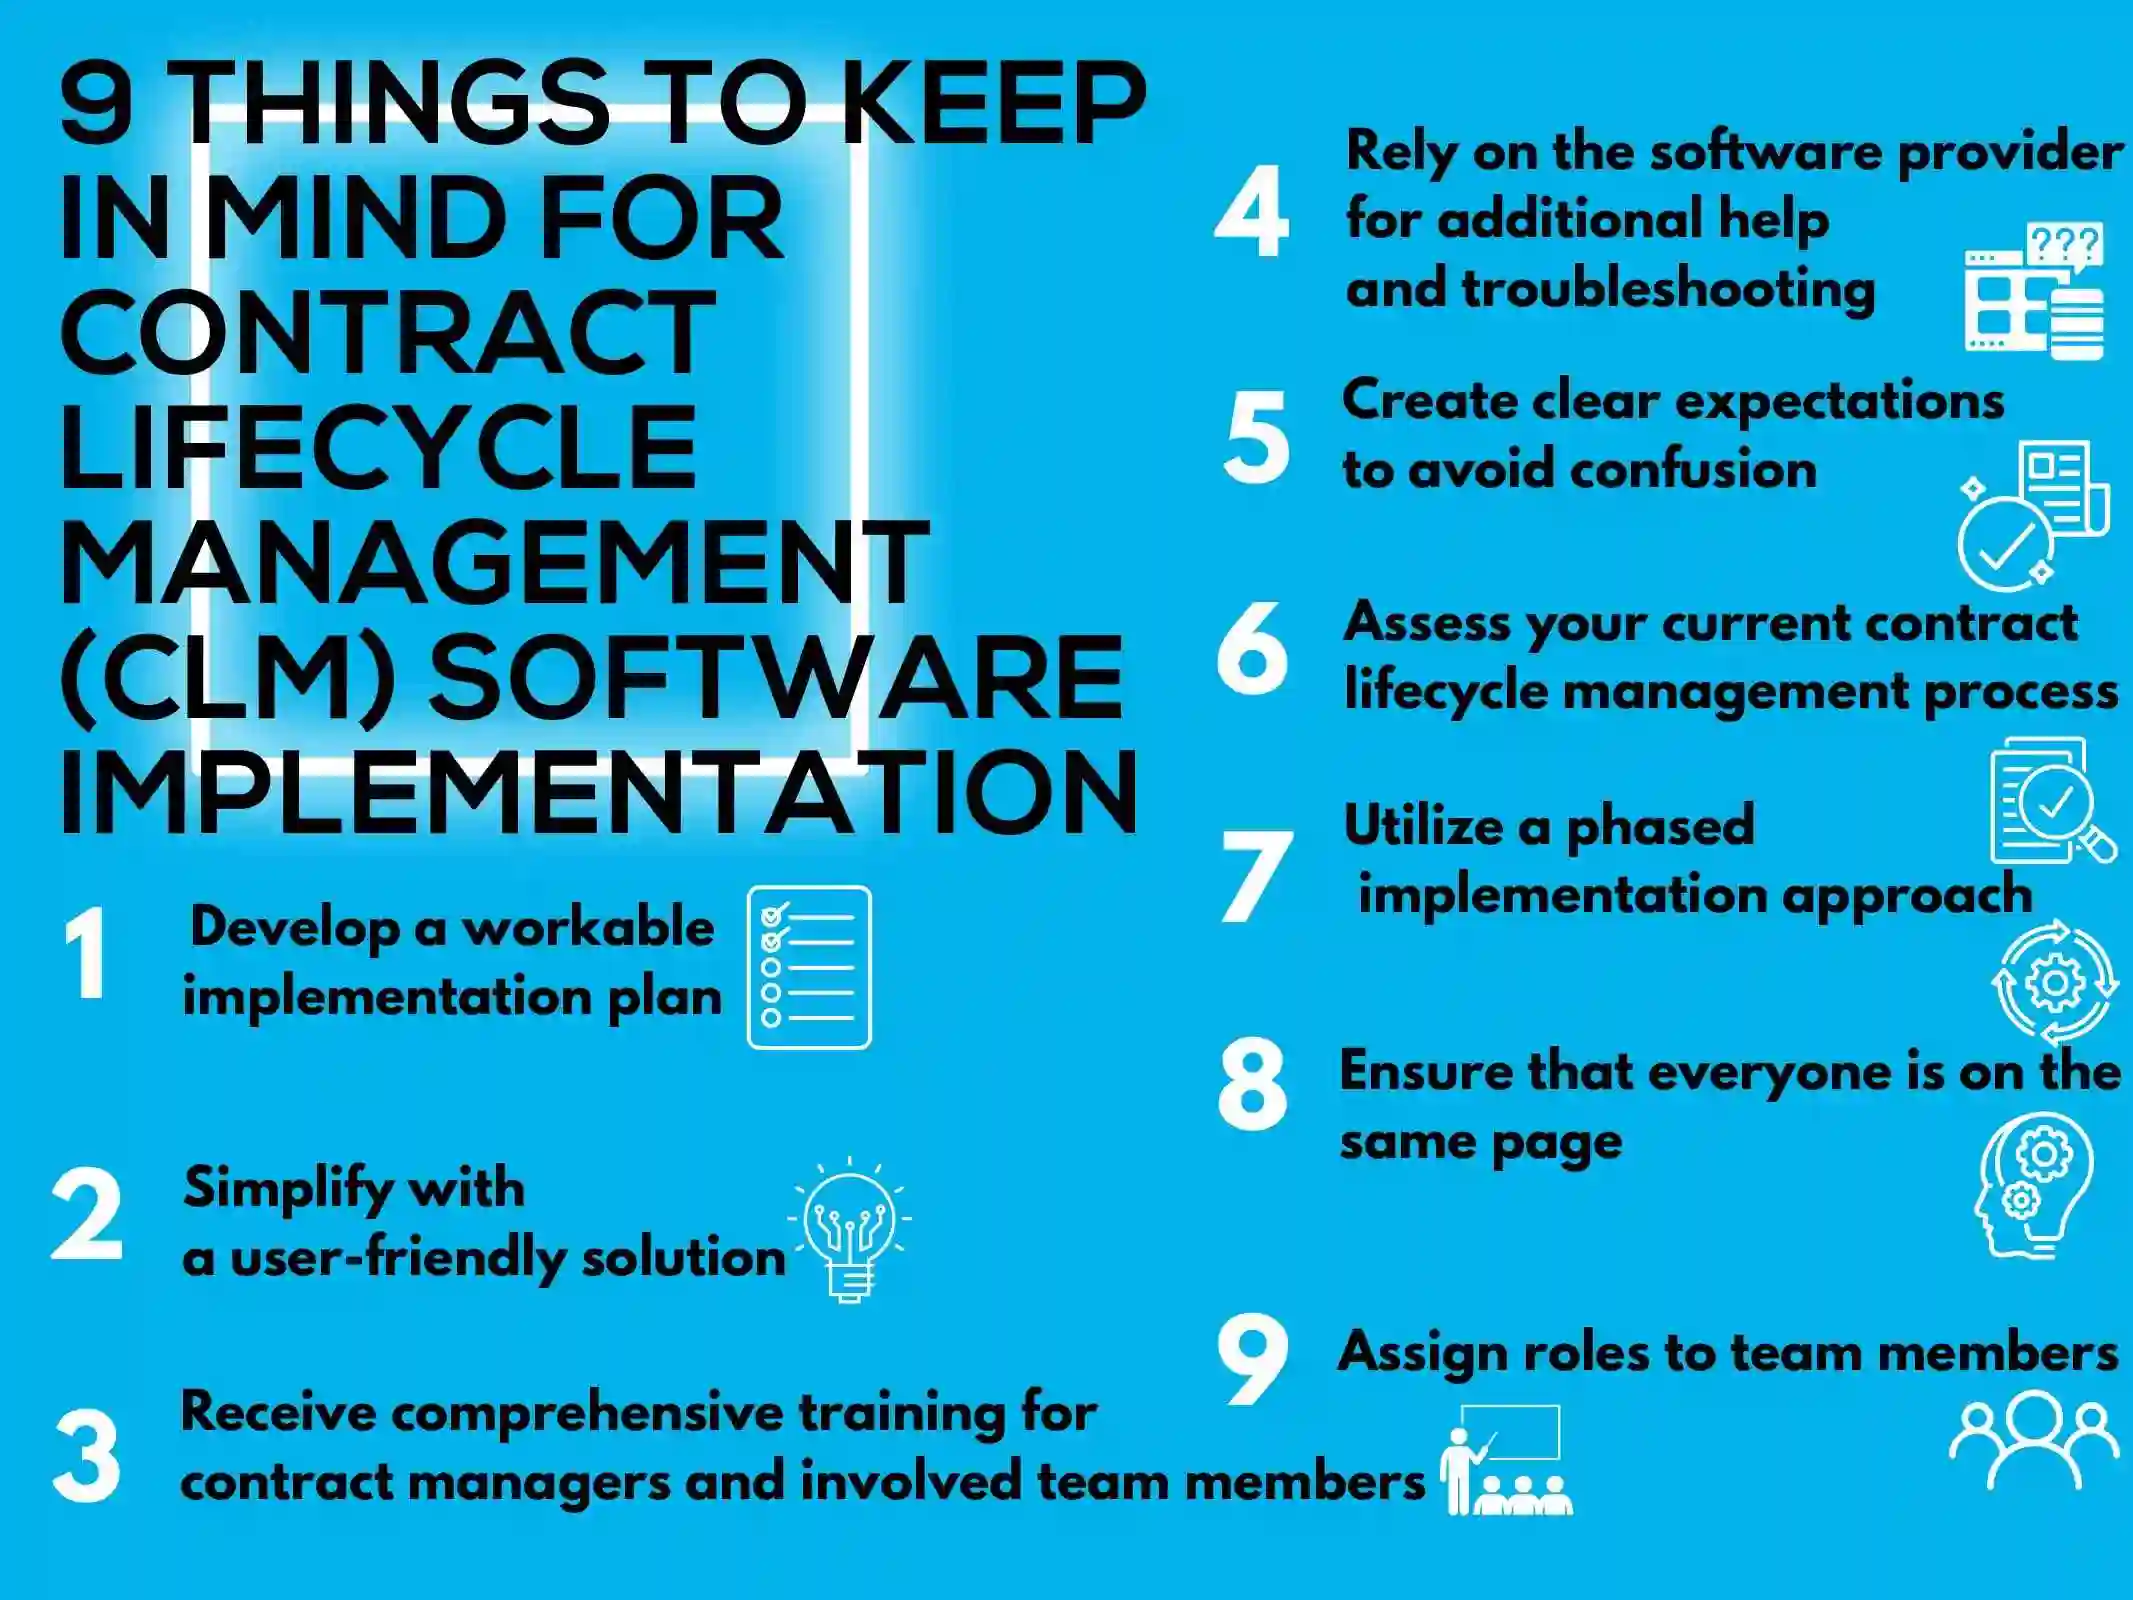 9 Things to Keep In Mind For Contract Lifecycle Management (CLM) Software Implementation